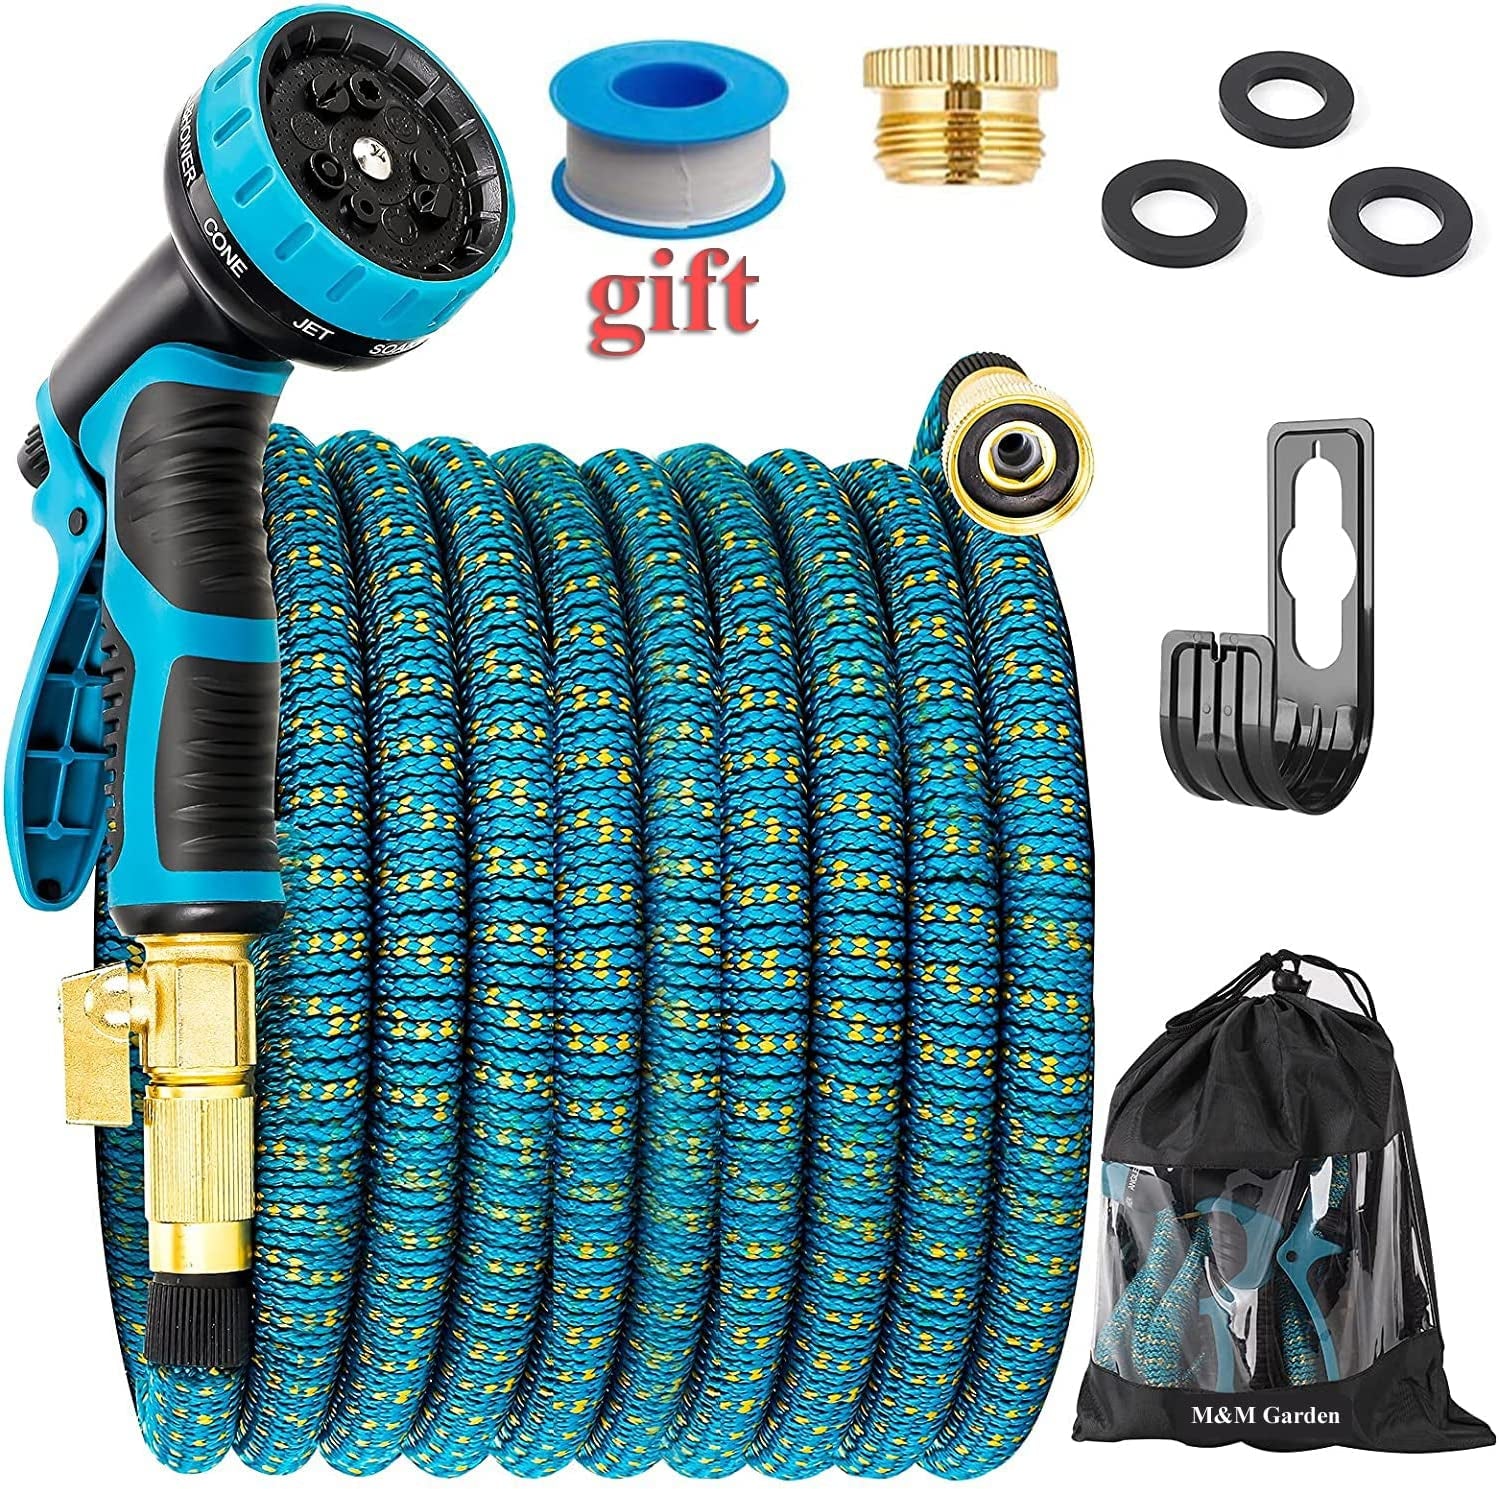 M&Mgarden, M&Mgarden Expandable Garden Hose with Hose Pipe Nozzle Garden Sprayer AU Standard Durable 3-Layers Latex 3/4" & Solid Brass Fitting & Expending Kink Free, Gardening Supplies Set Kit (15 Meters (50 Feet))